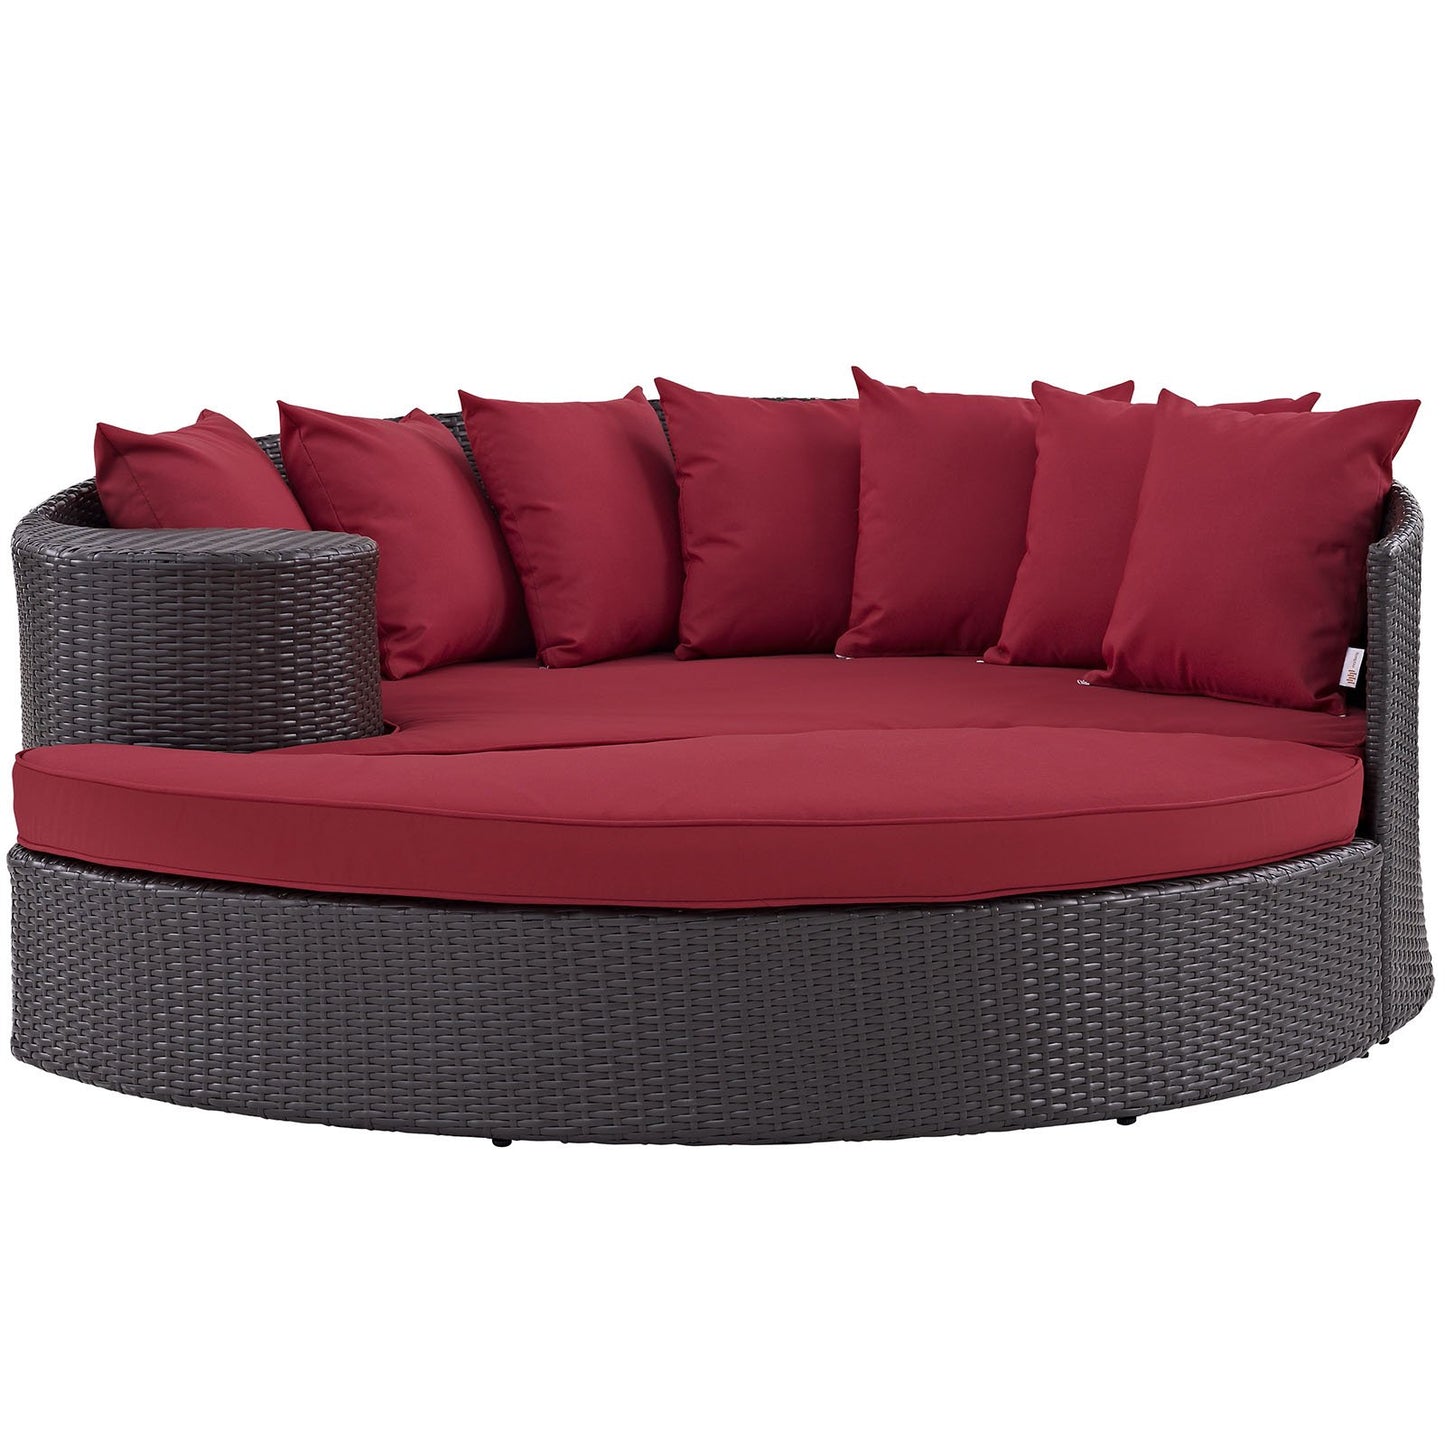 Modway Convene Outdoor Wicker Sectional Daybed, Espresso/Red